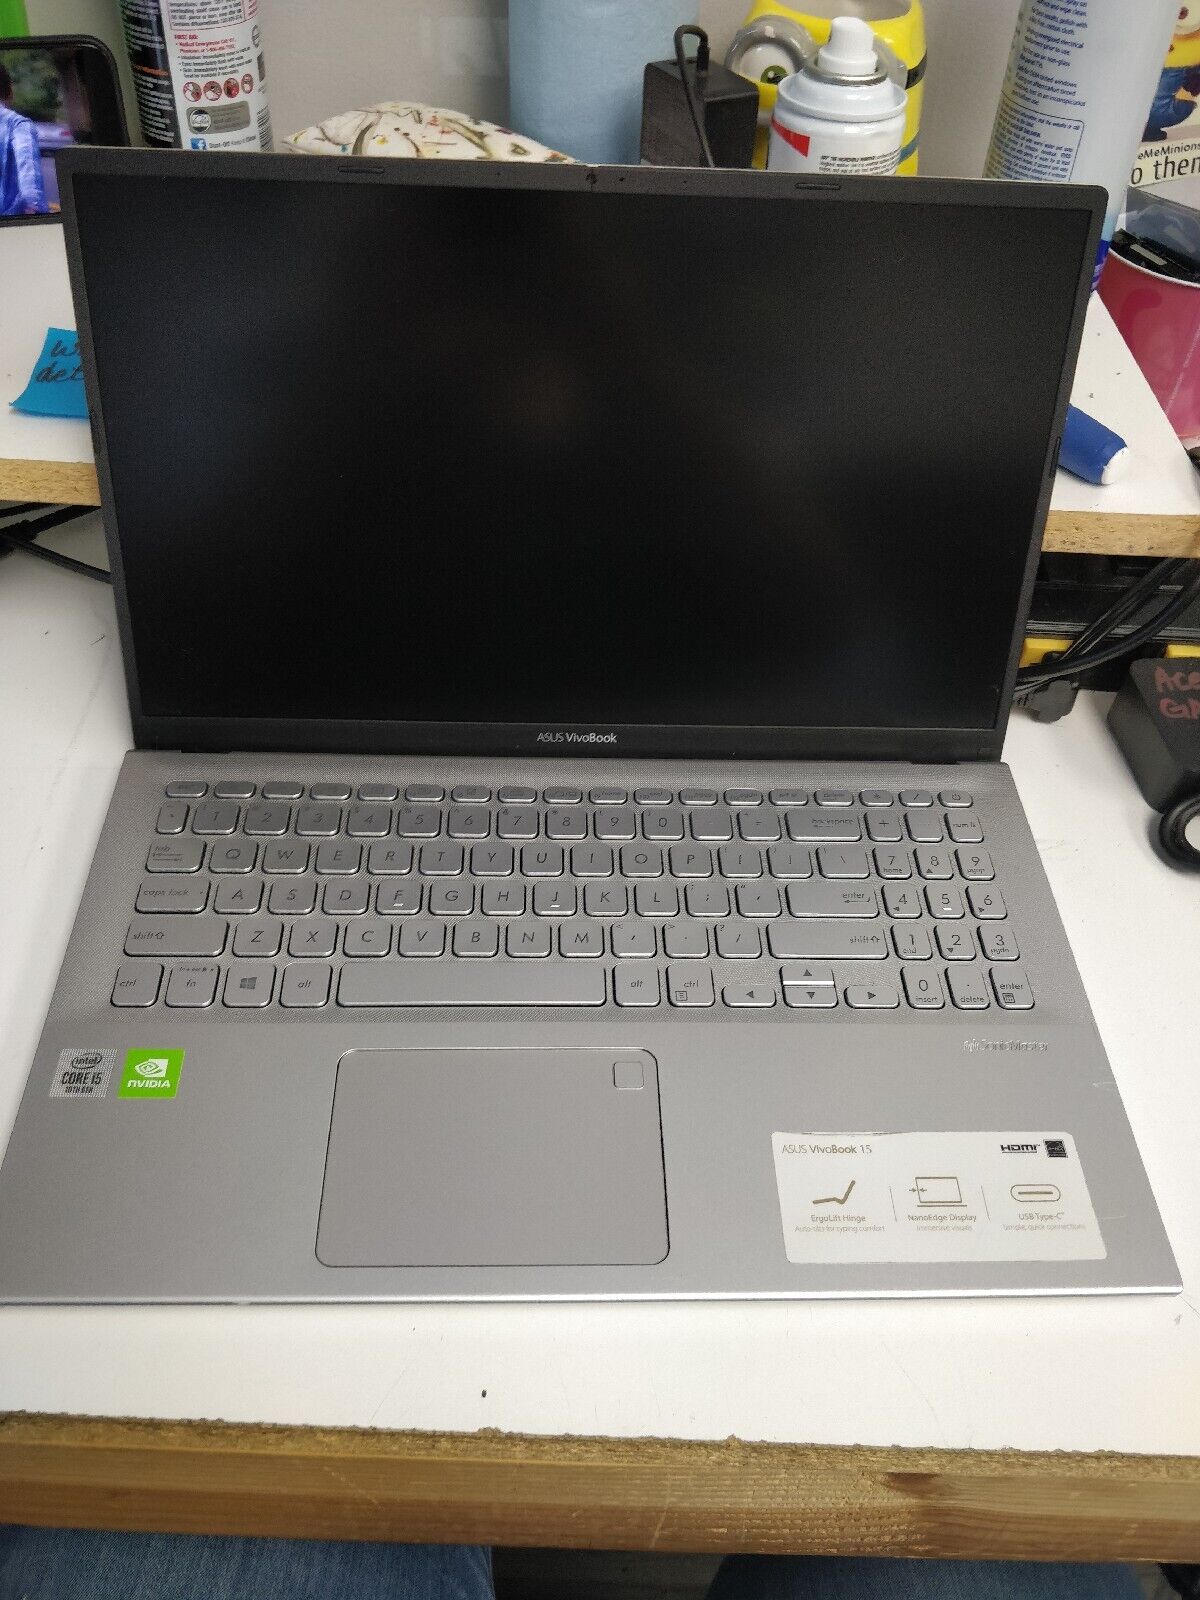 ASUS VivoBook 15 S512F Thin i5 10th gen 8gb ram no drives parts 60411. Available Now for 119.00